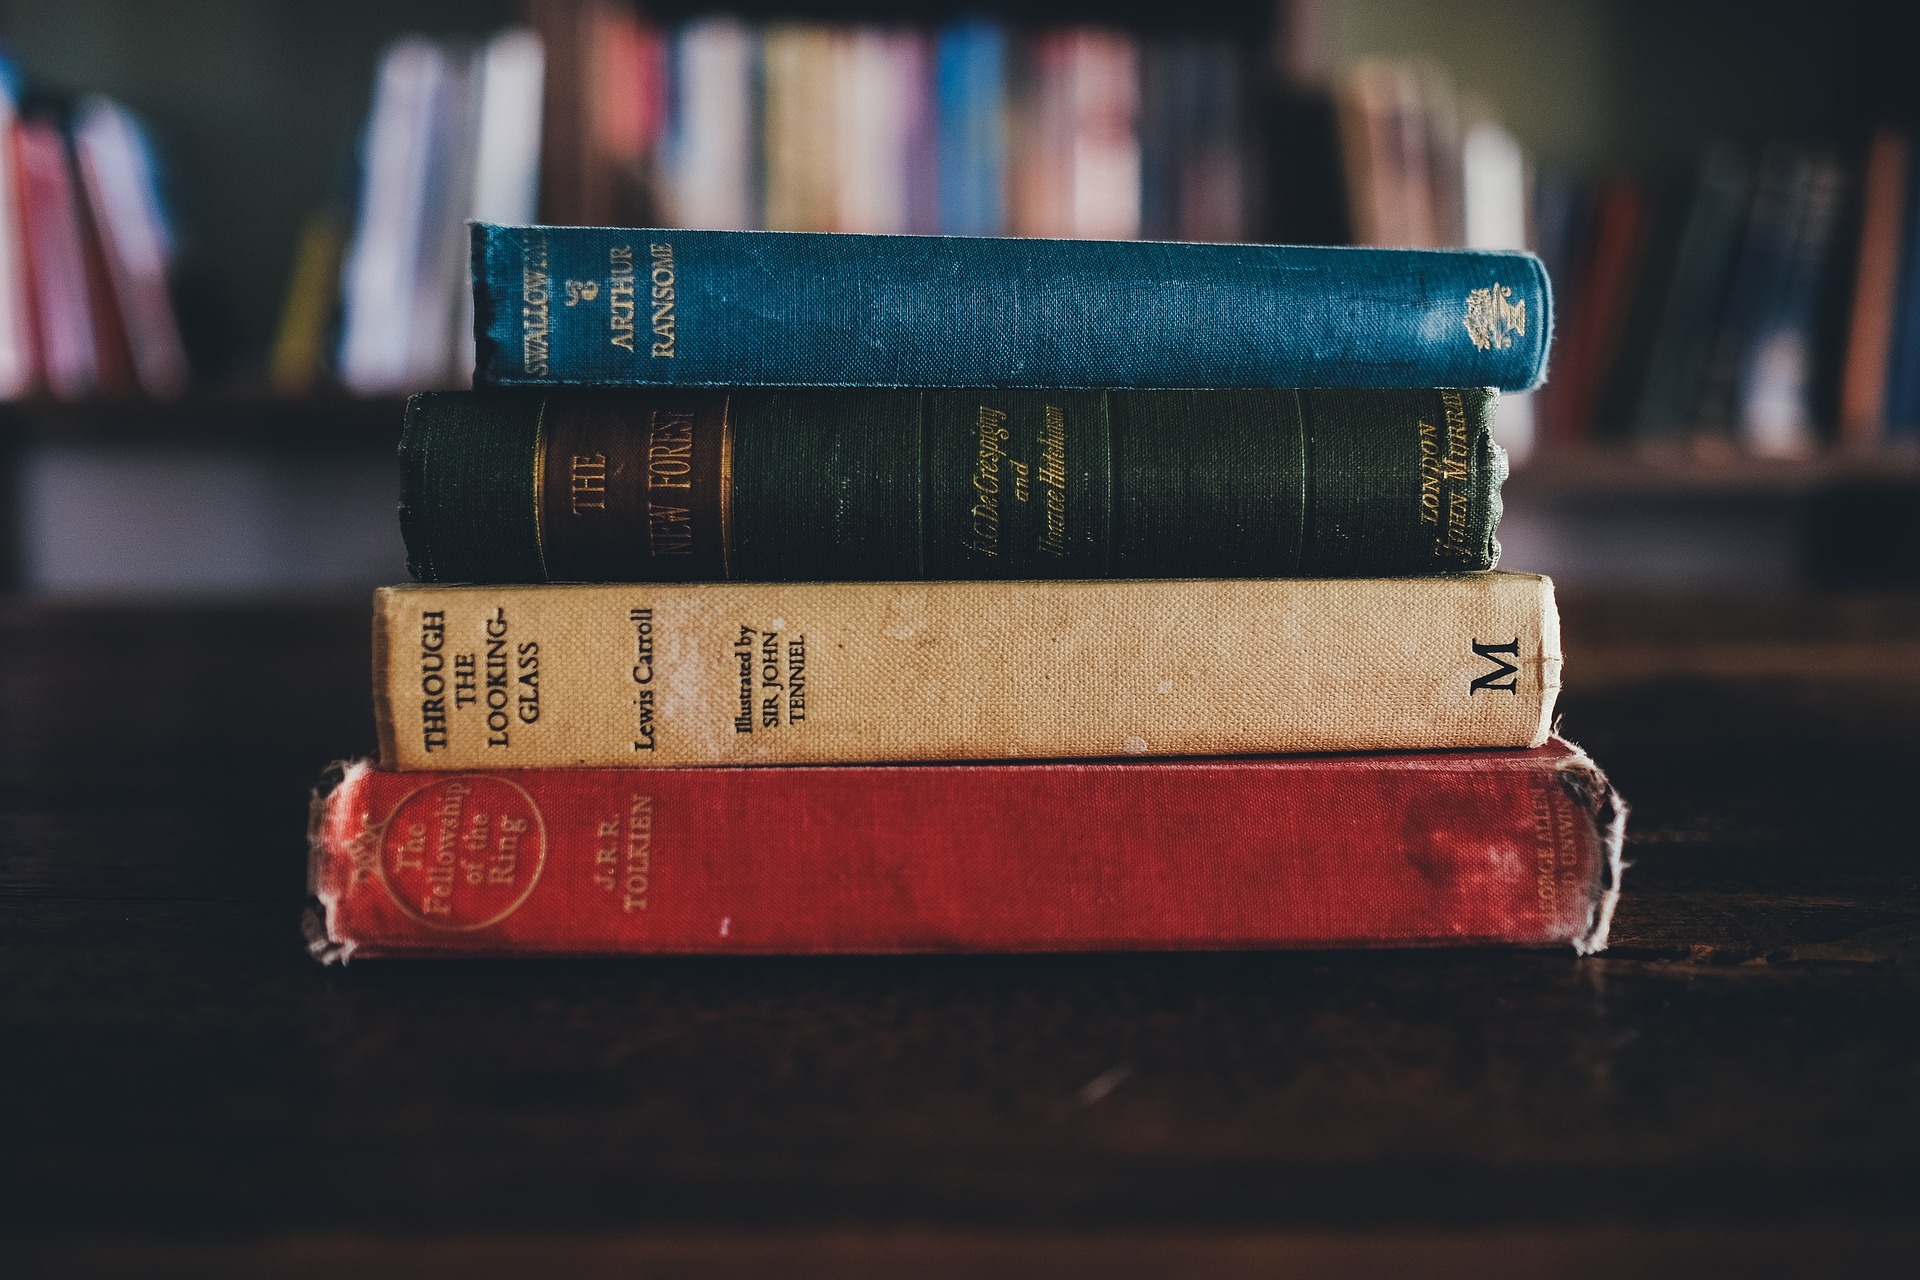 Image of a books temporarily used as a nice blurry background effect.